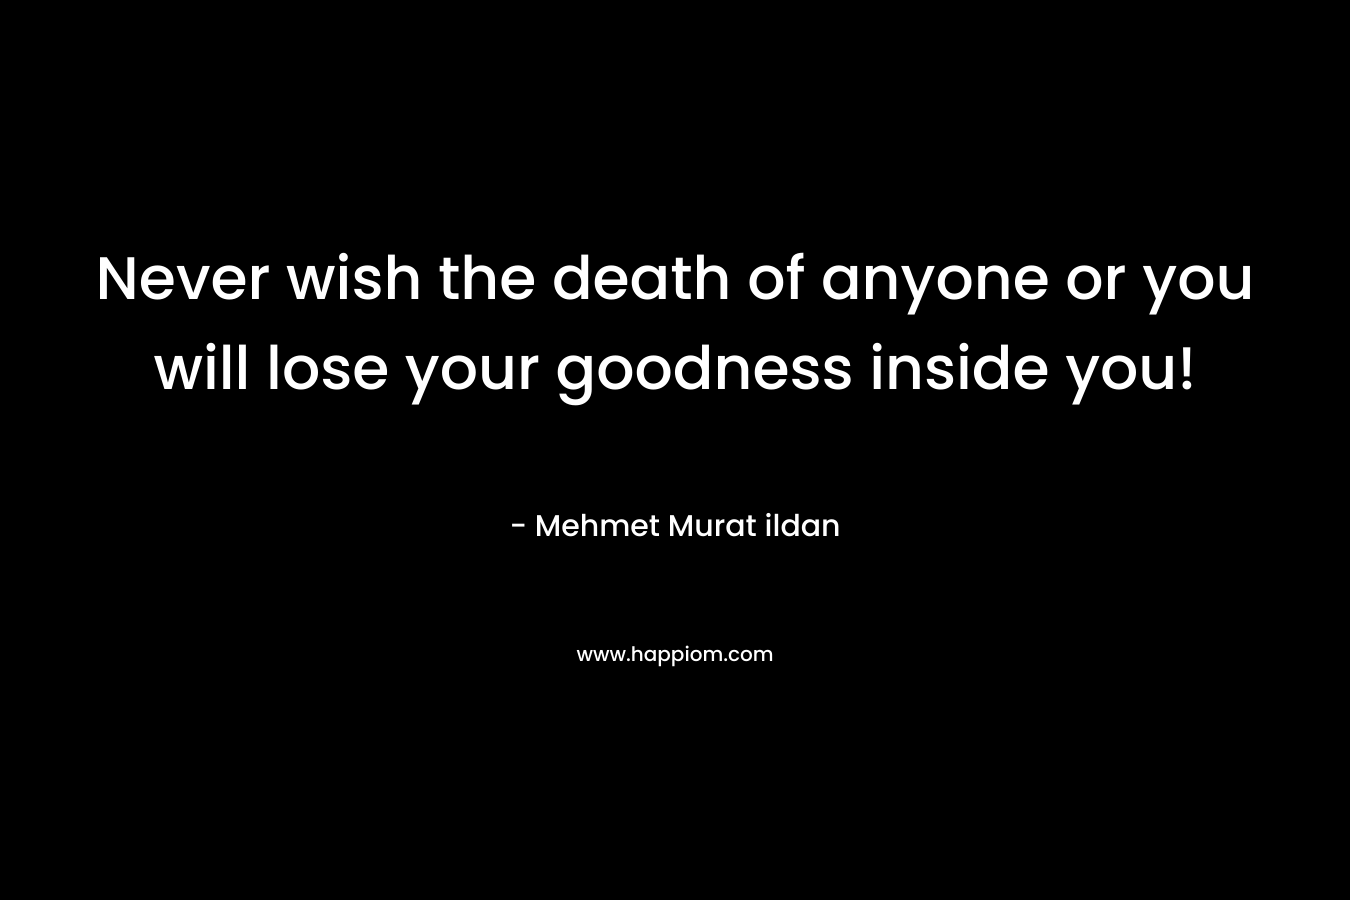 Never wish the death of anyone or you will lose your goodness inside you! – Mehmet Murat ildan